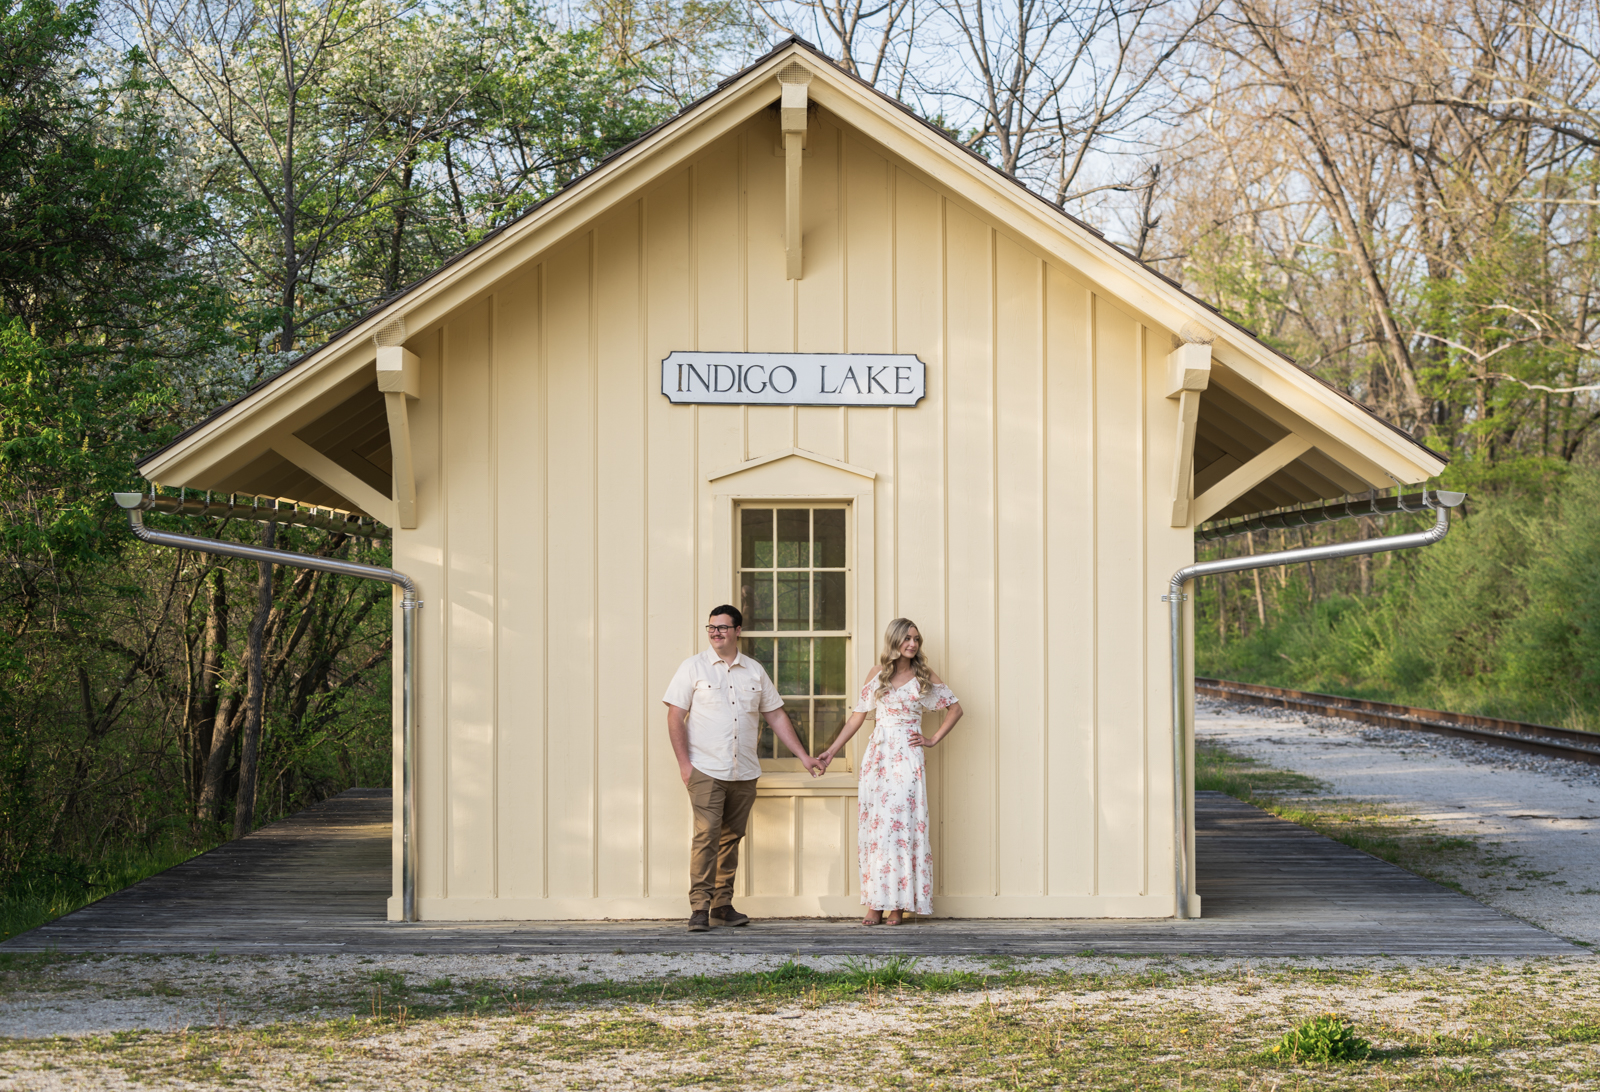 A Fairytale Engagement: Jack and Lilly’s Romantic Shoot at Everett Bridge and Indigo Lake